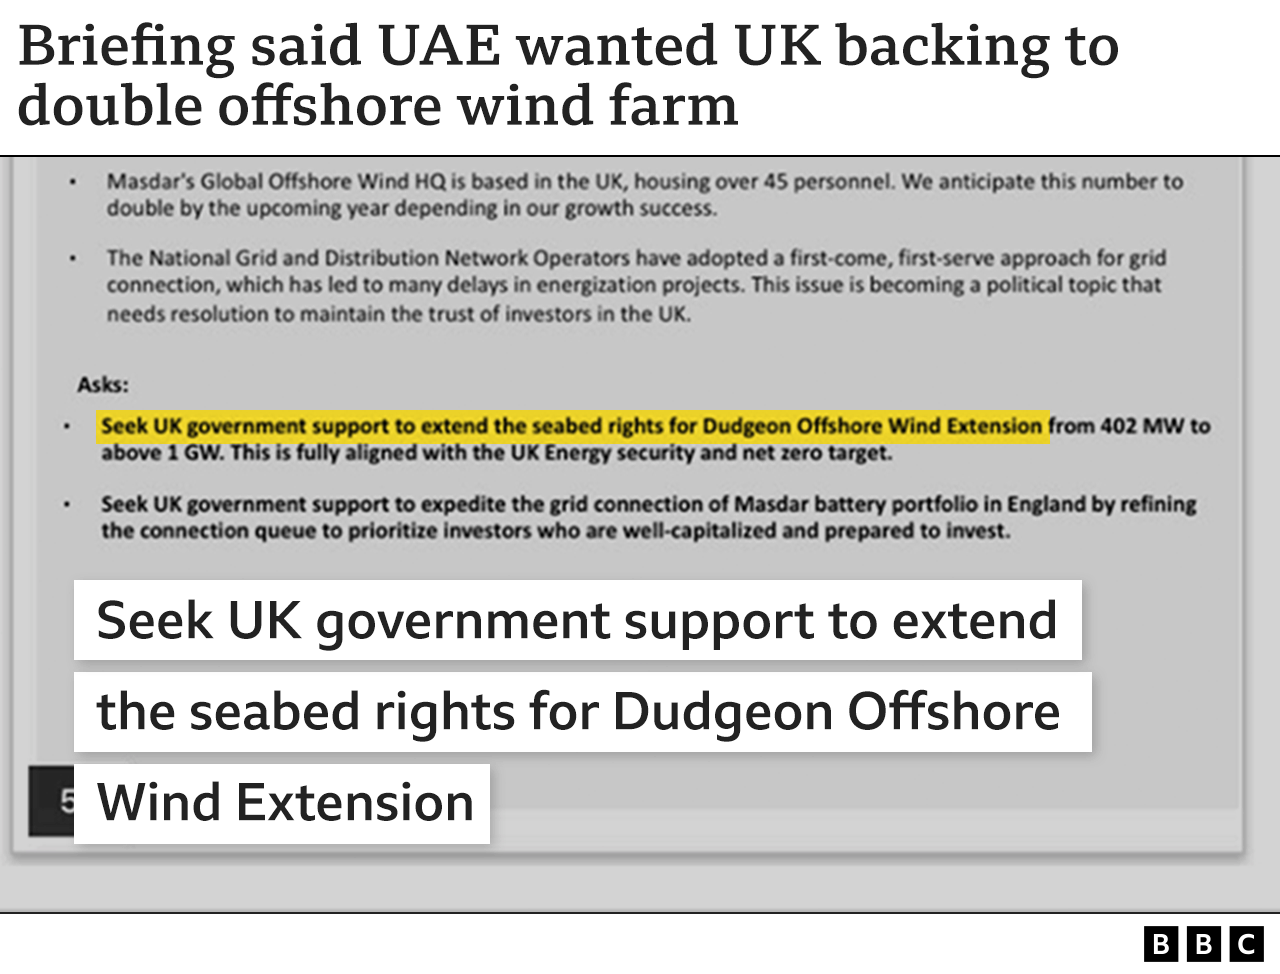 Graphic showing quote from briefing document for the UAE COP28 team's meeting with Brazil's environment minister, mentioning the Braskem deal and saying "Securing alignment and endorsement for the deal at the highest level is important for us"